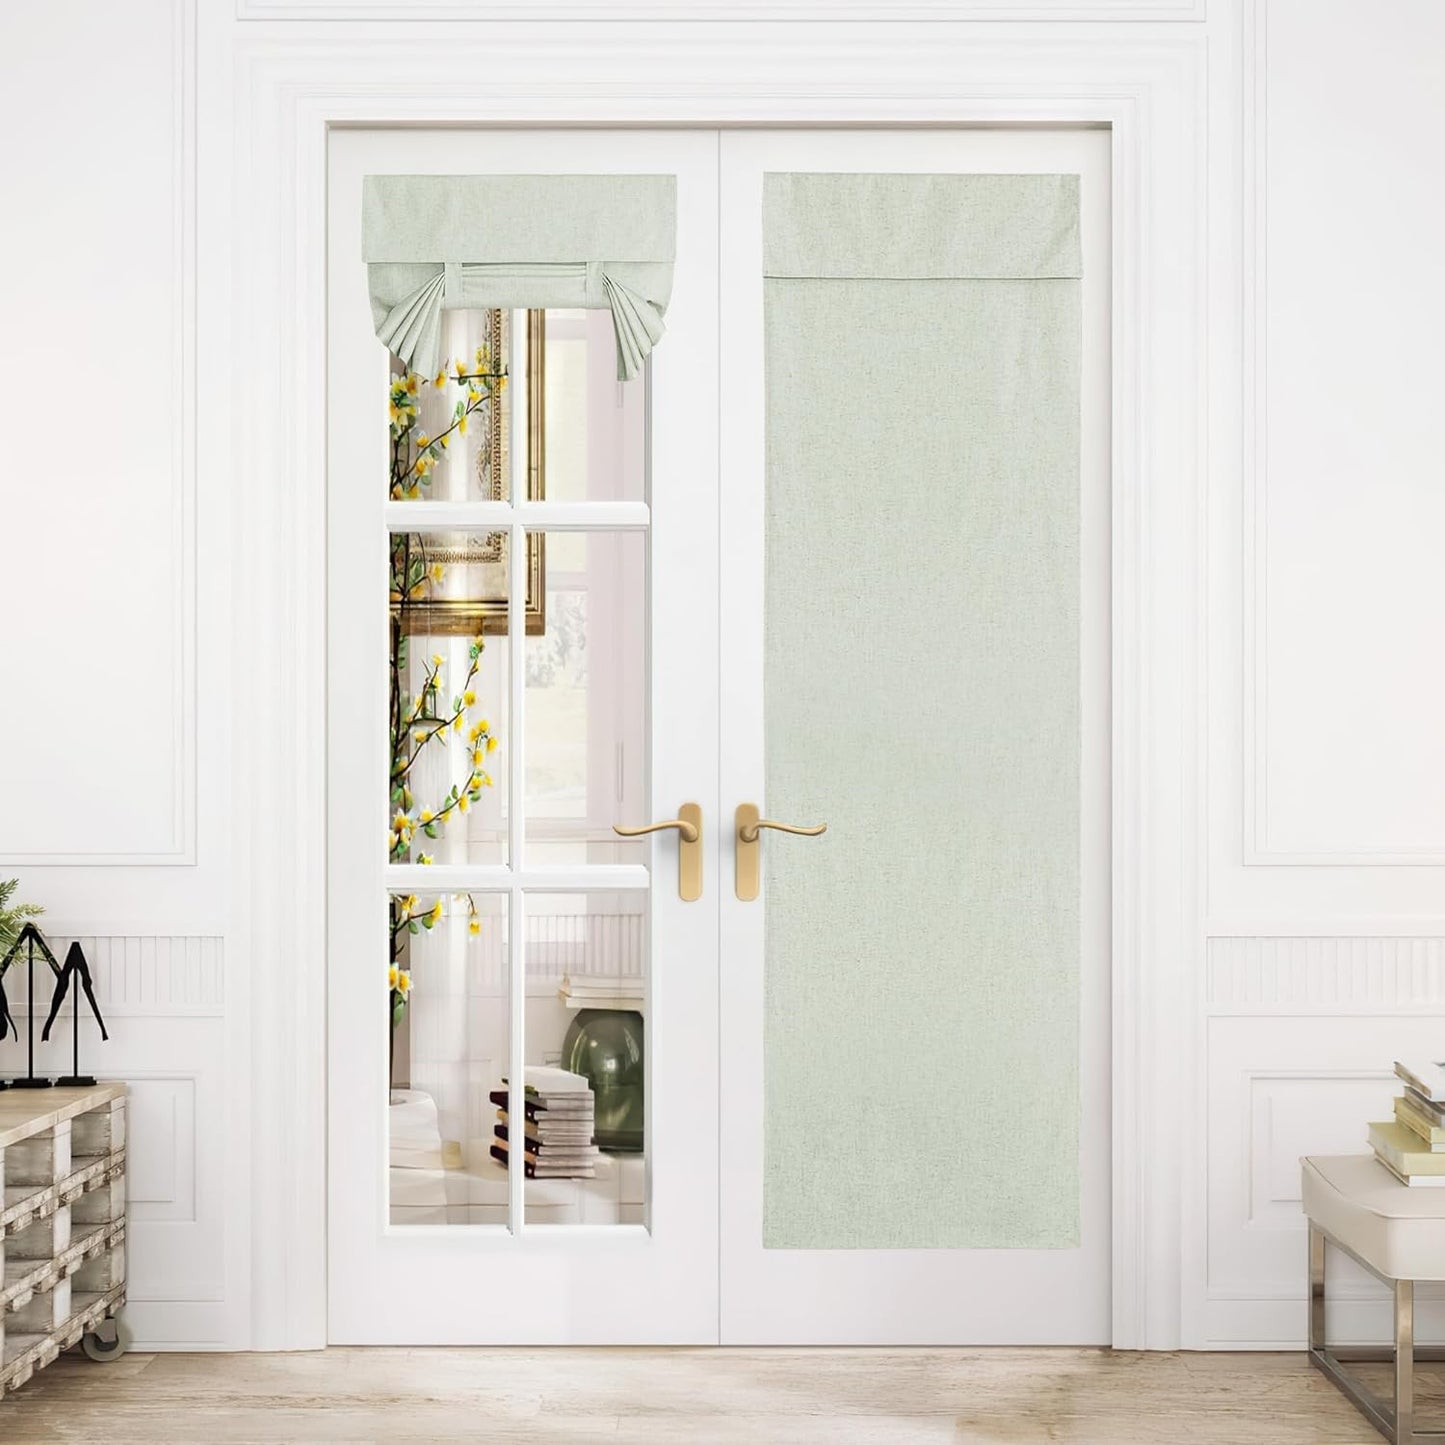 NICETOWN Linen Door Curtain for Door Window, Farmhouse French Door Curtain Shade for Kitchen Bathroom Energy Saving 100% Blackout Tie up Shade for Patio Sliding Glass, 1 Panel, Natural, 26" W X 72" L  NICETOWN Sage Green W26 X L72 